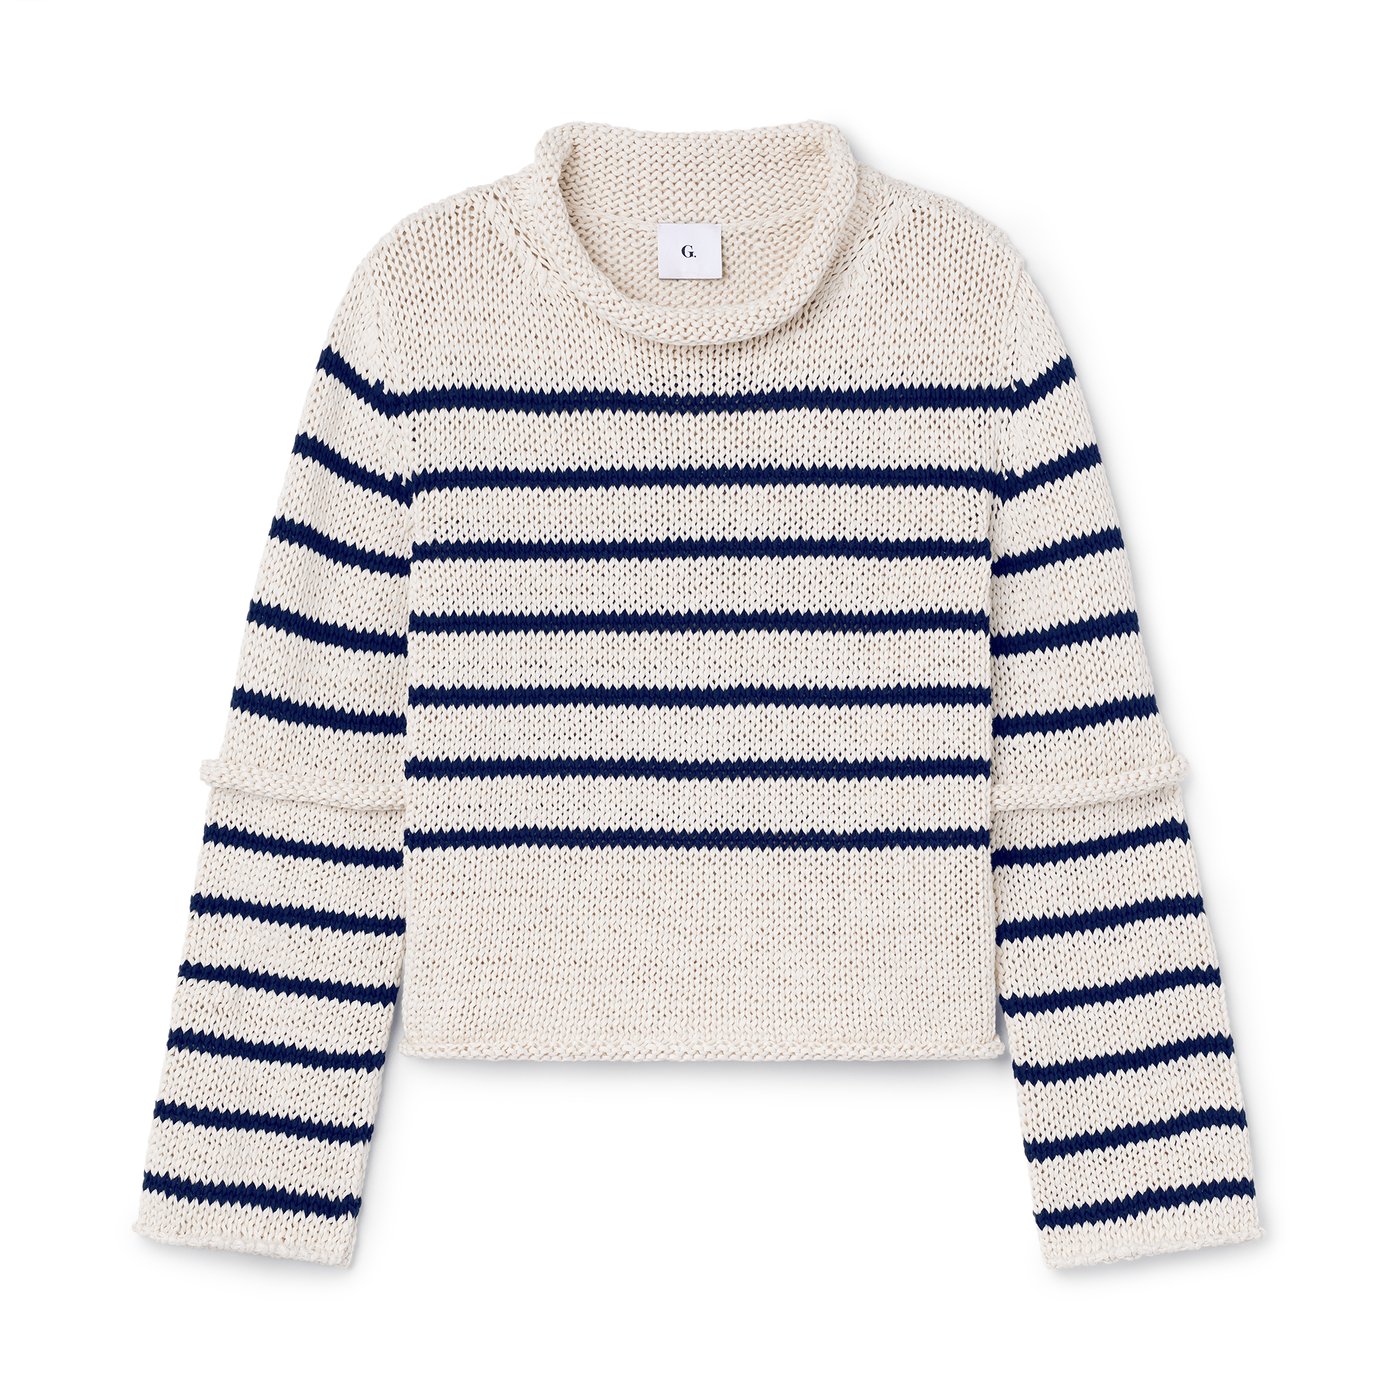 Tightly knitted With the collection of t-shirts by G-Star RAW